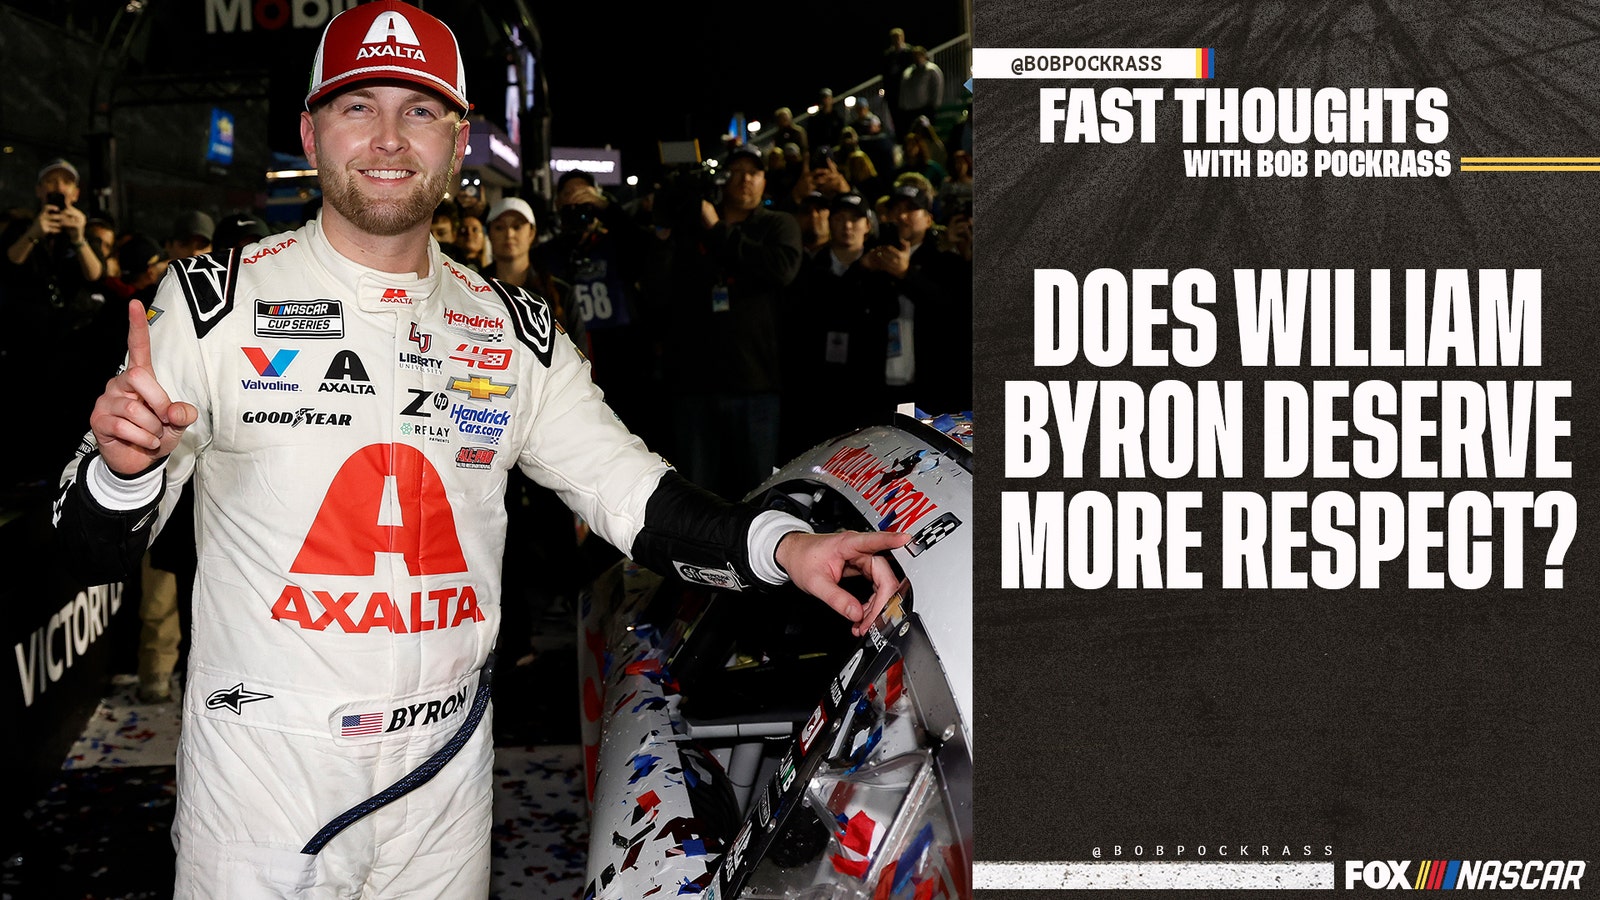 Is it time for WIlliam Byron to get the credit he deserves? 